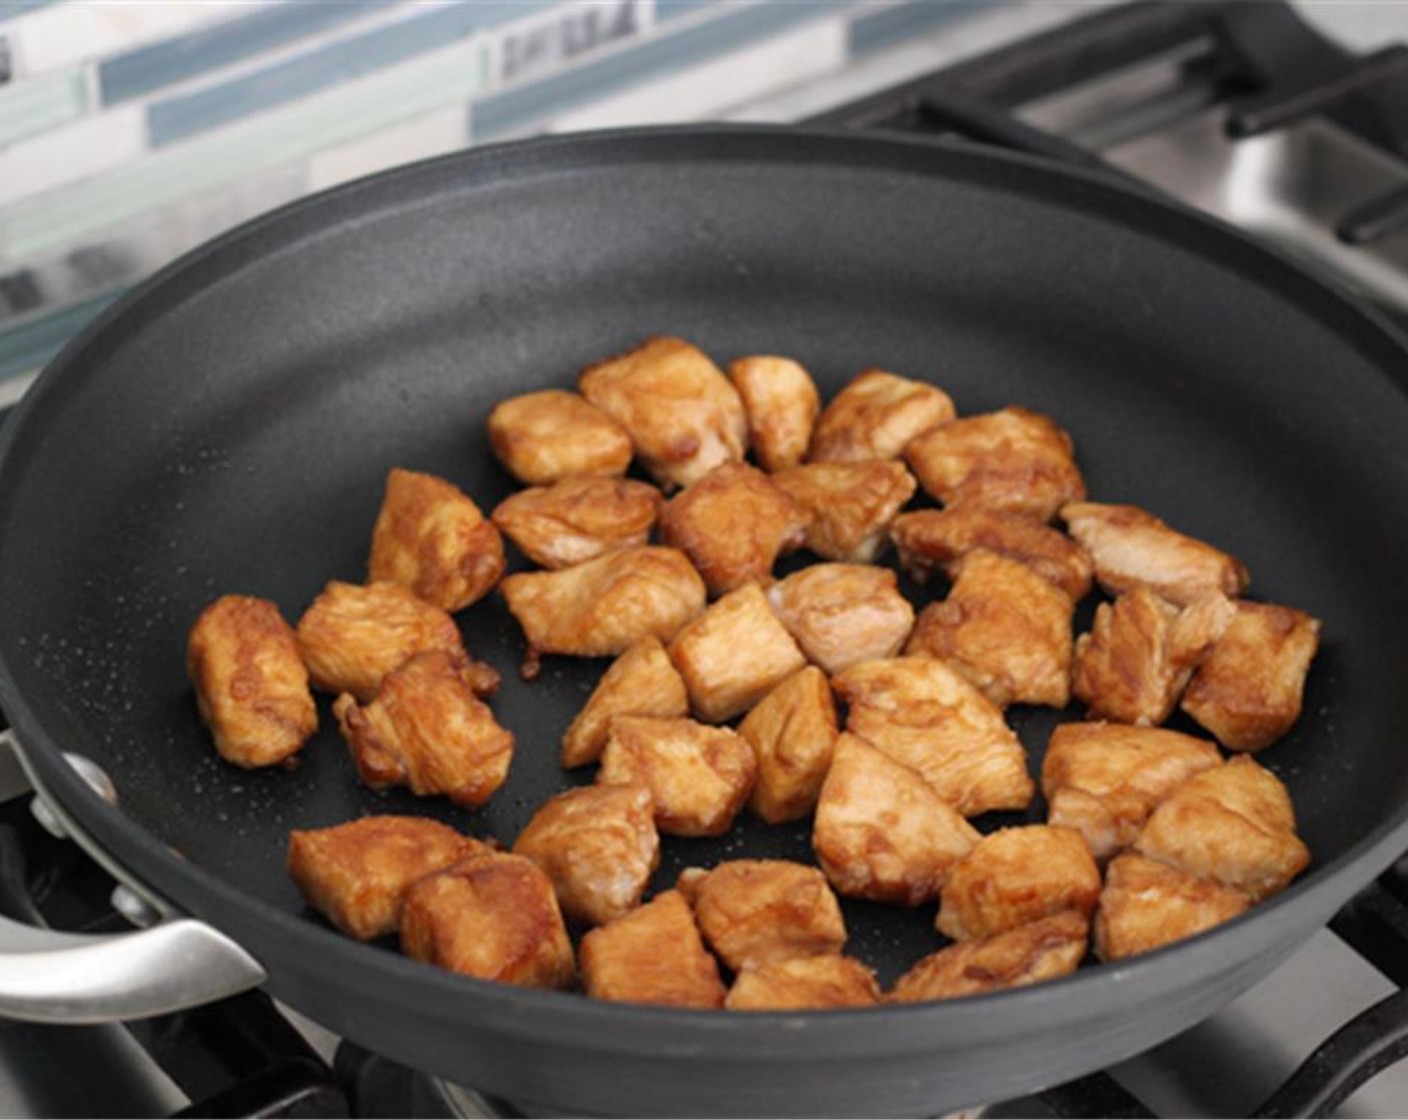 step 6 Heat Canola Oil (1 Tbsp) in a 12 inch nonstick skillet and set to  to medium heat and then cook the chopped Skinless Chicken Breasts in two batches. About 2-3 minutes per side.